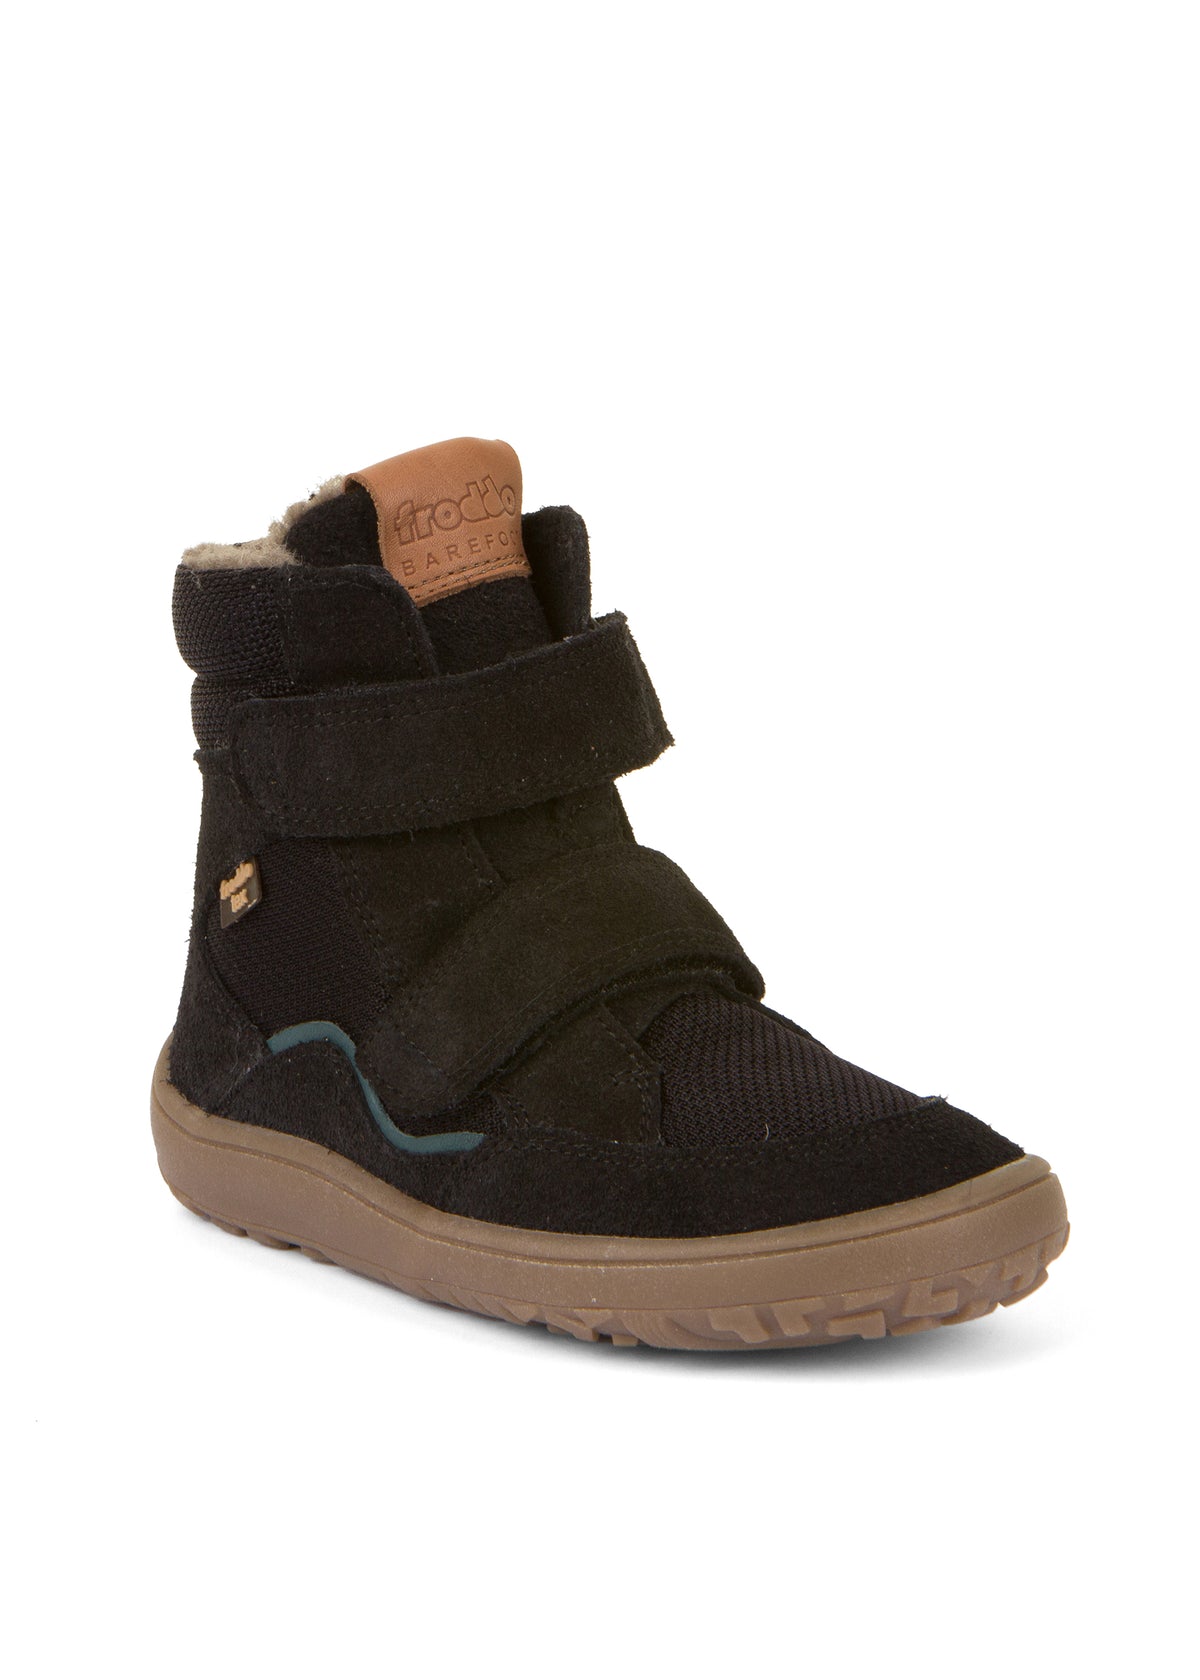 Children's barefoot shoes - winter shoes with TEX membrane - black